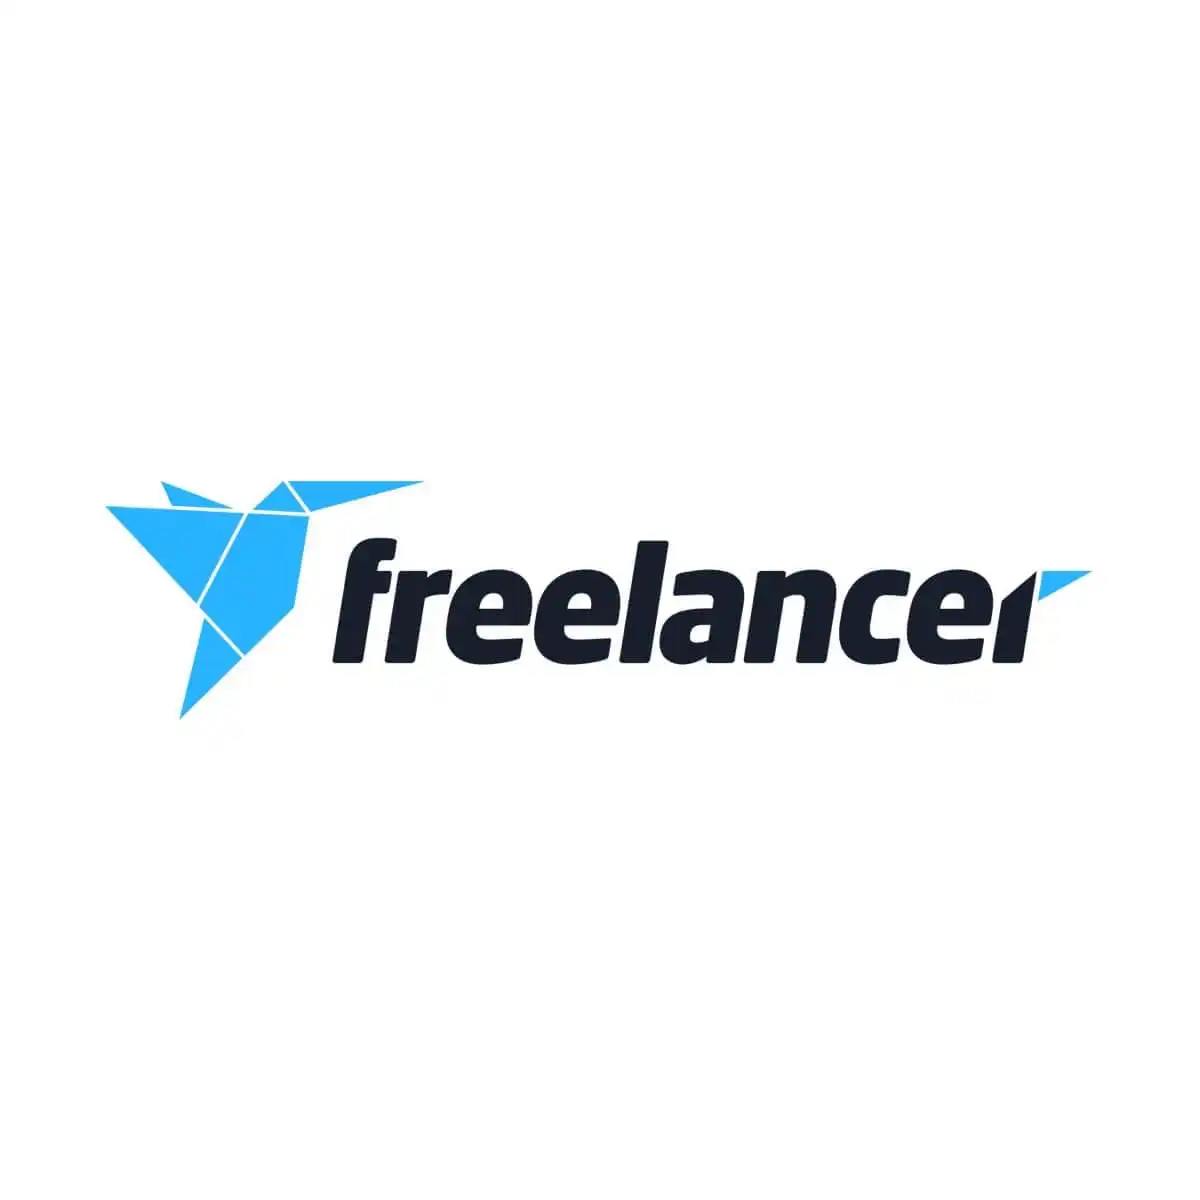 Ready to Find Top Freelancers? Try Freelancer.com